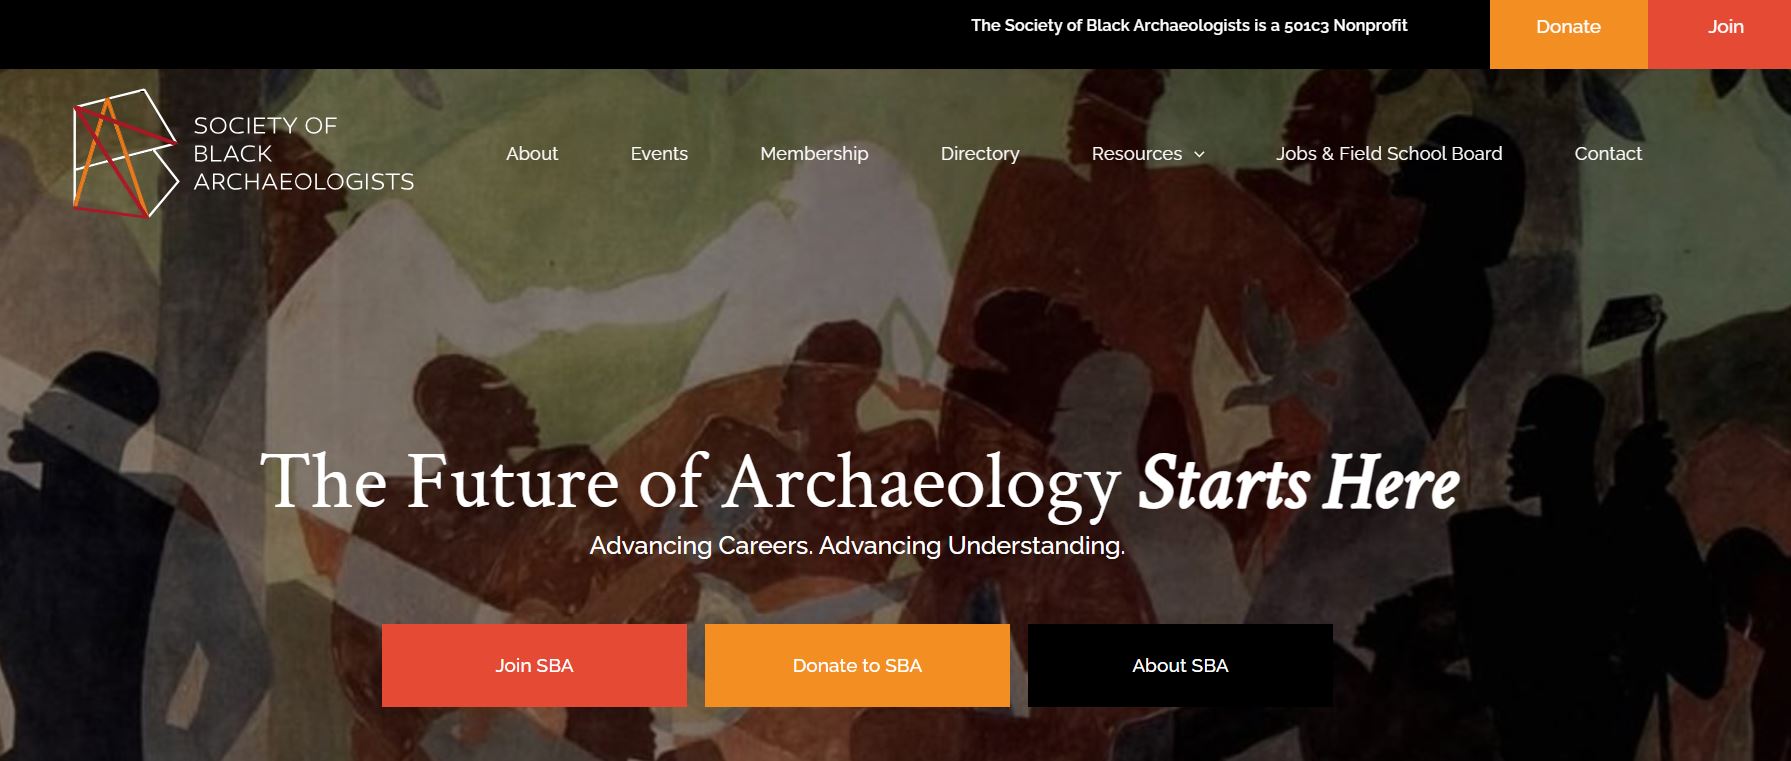 The Society of Black Archaeologists website